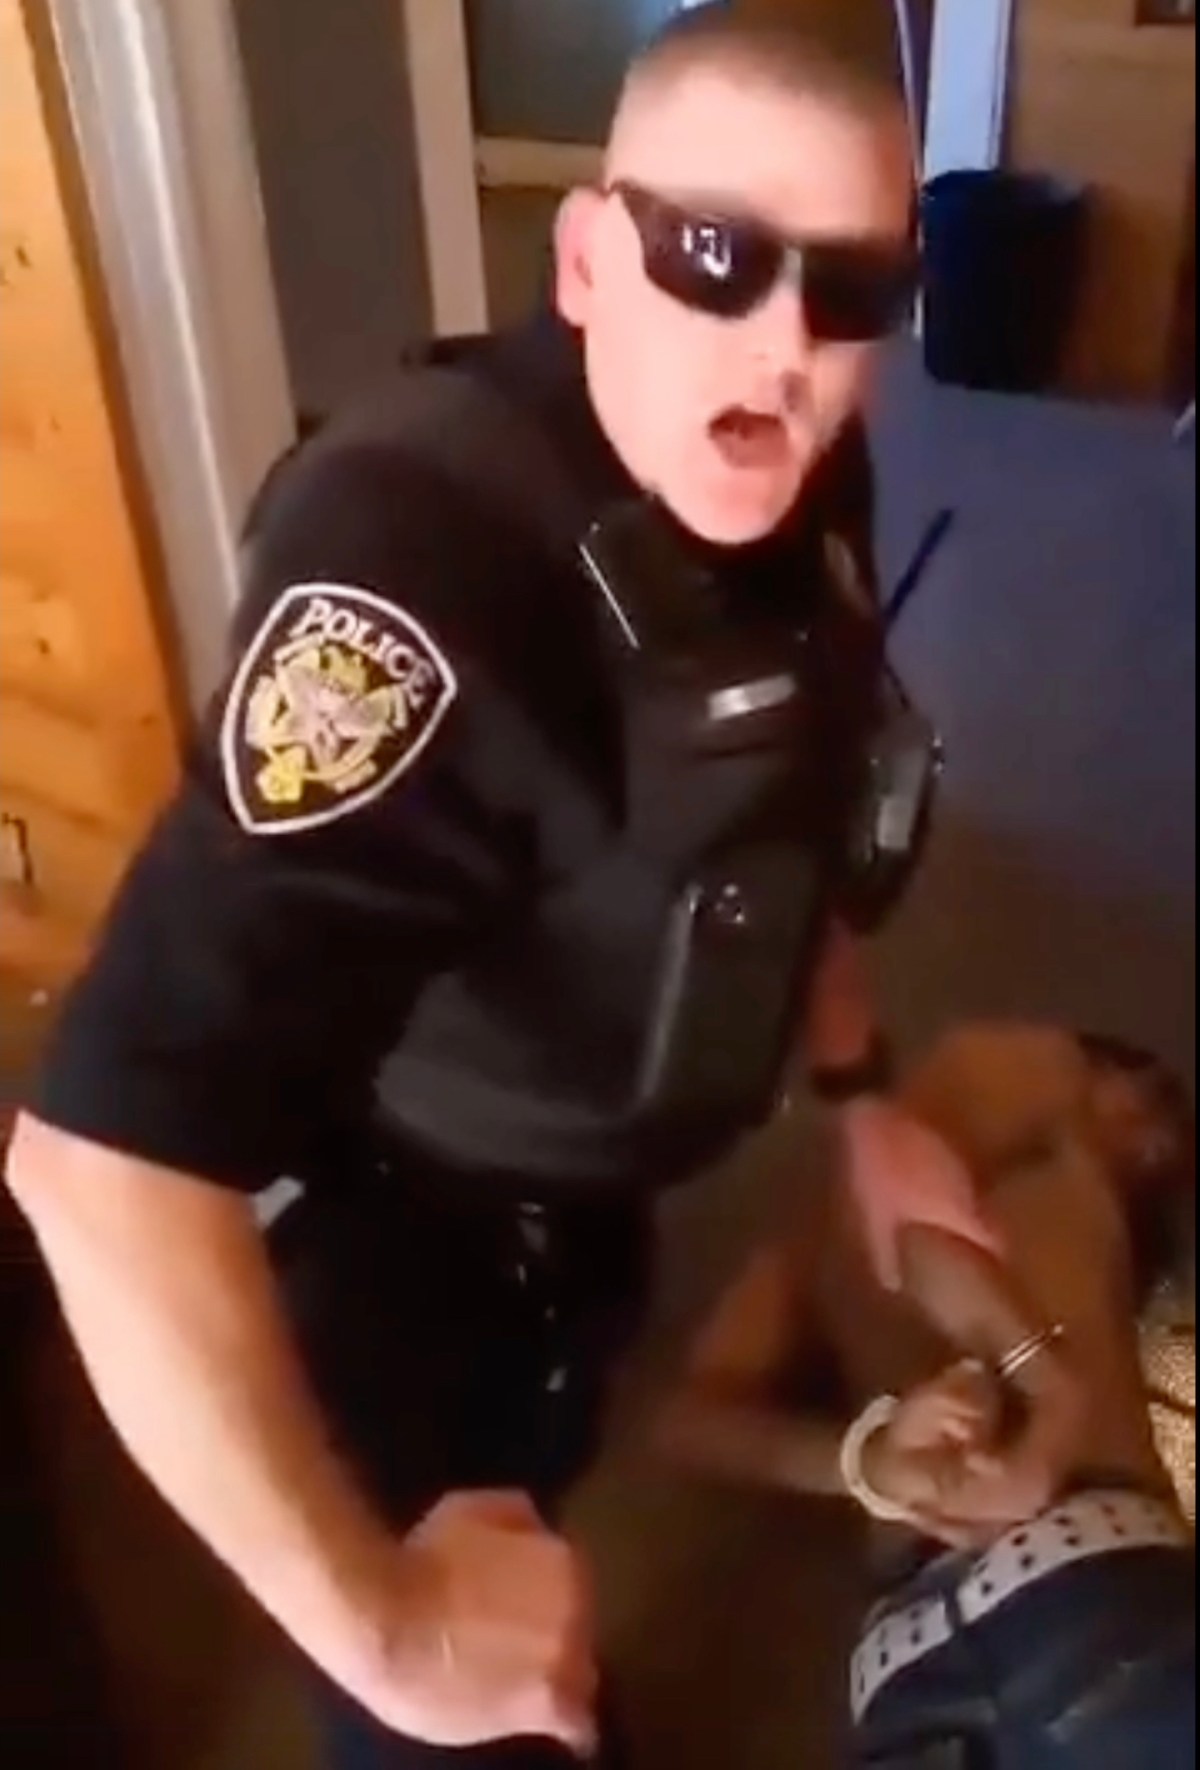 Body cam reveals Texas police raid home, arrest entire family, over alleged noise complaint